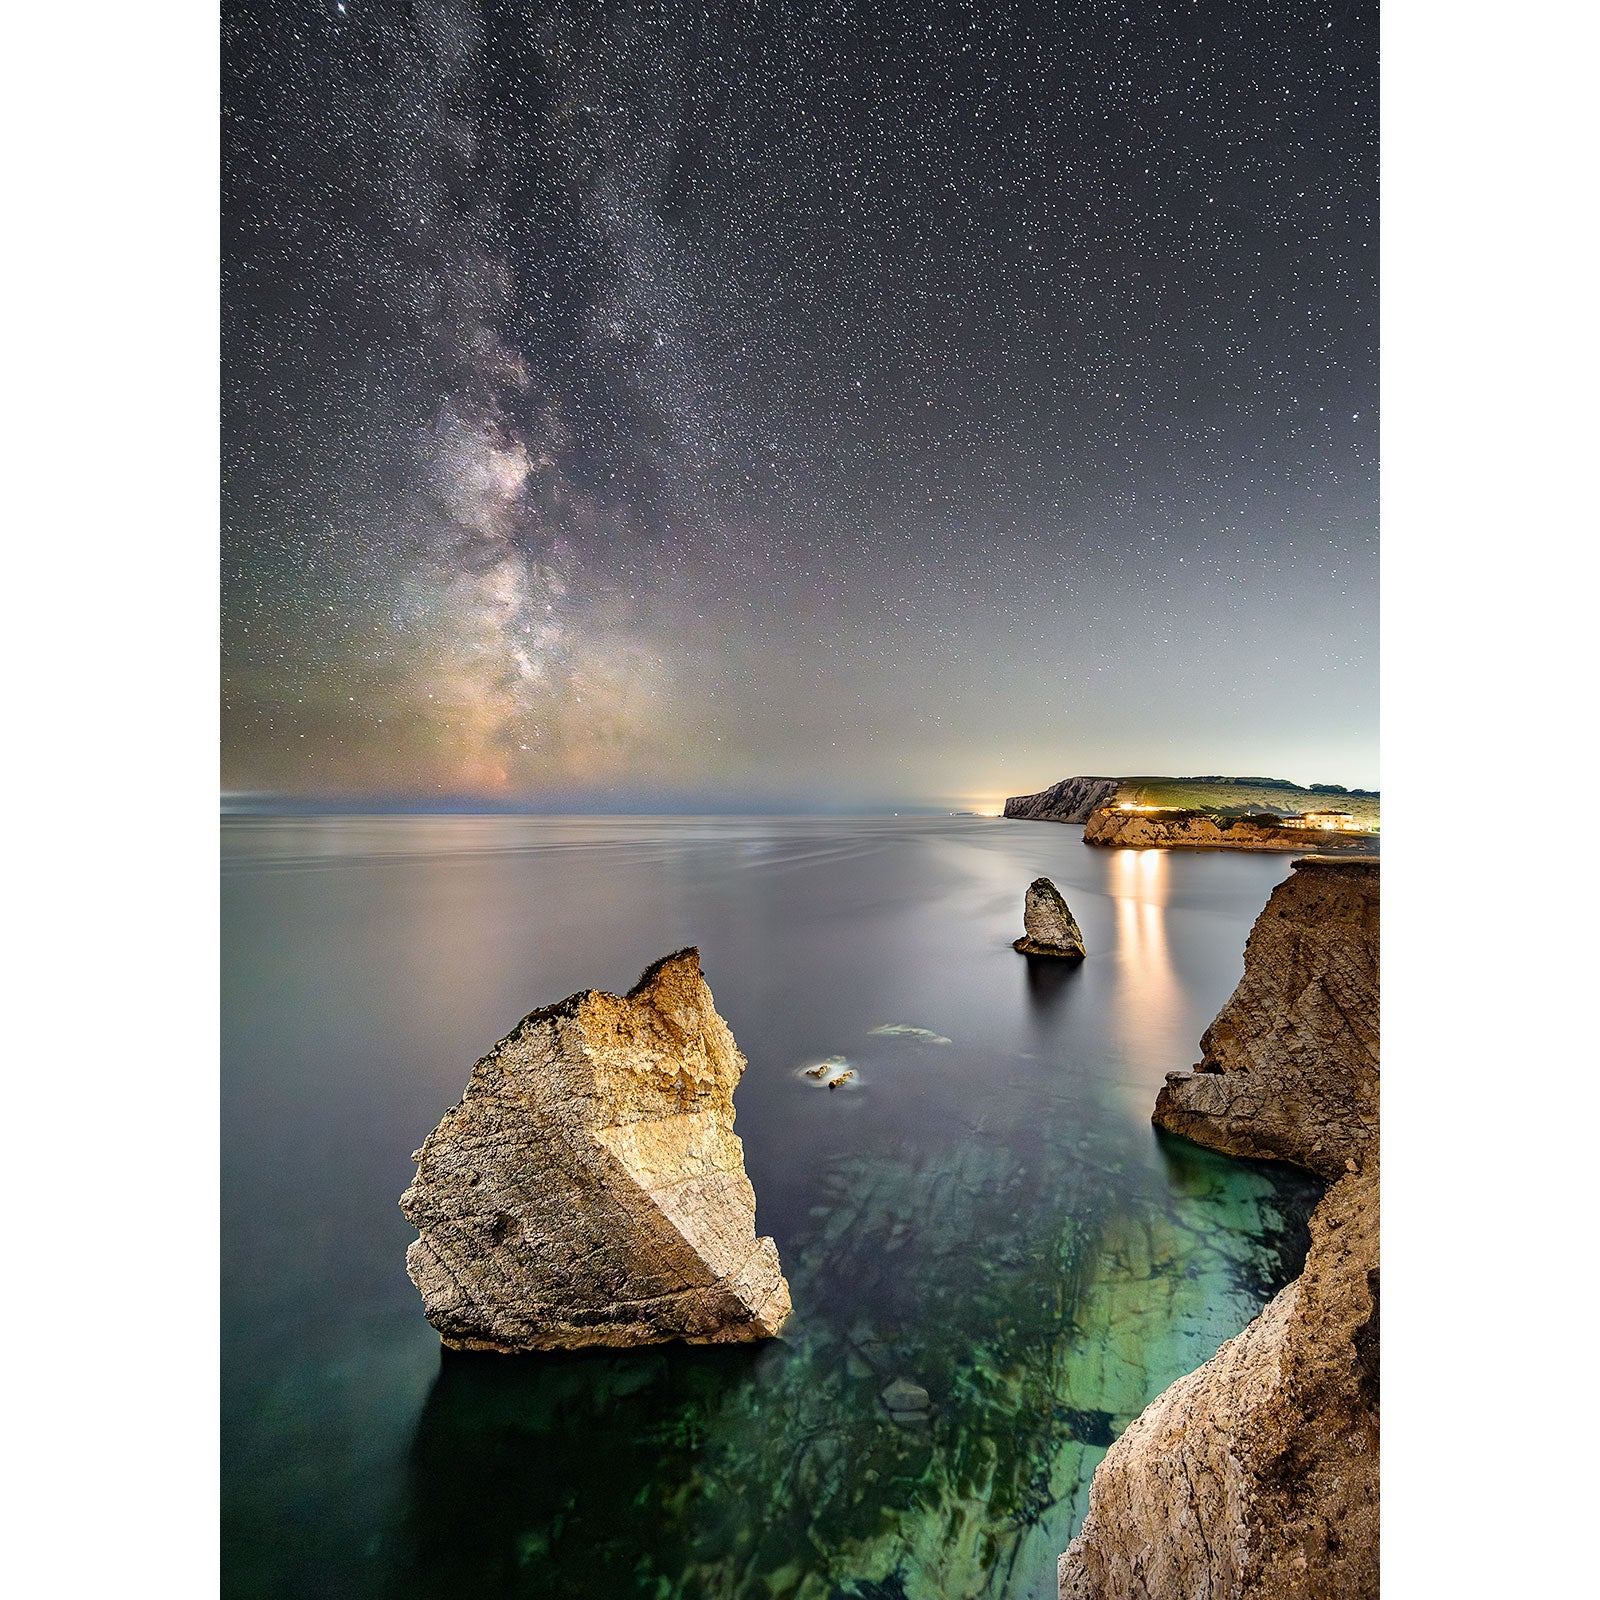 Milky Way above a serene sea with rocky outcrops along the coast of Freshwater Bay.